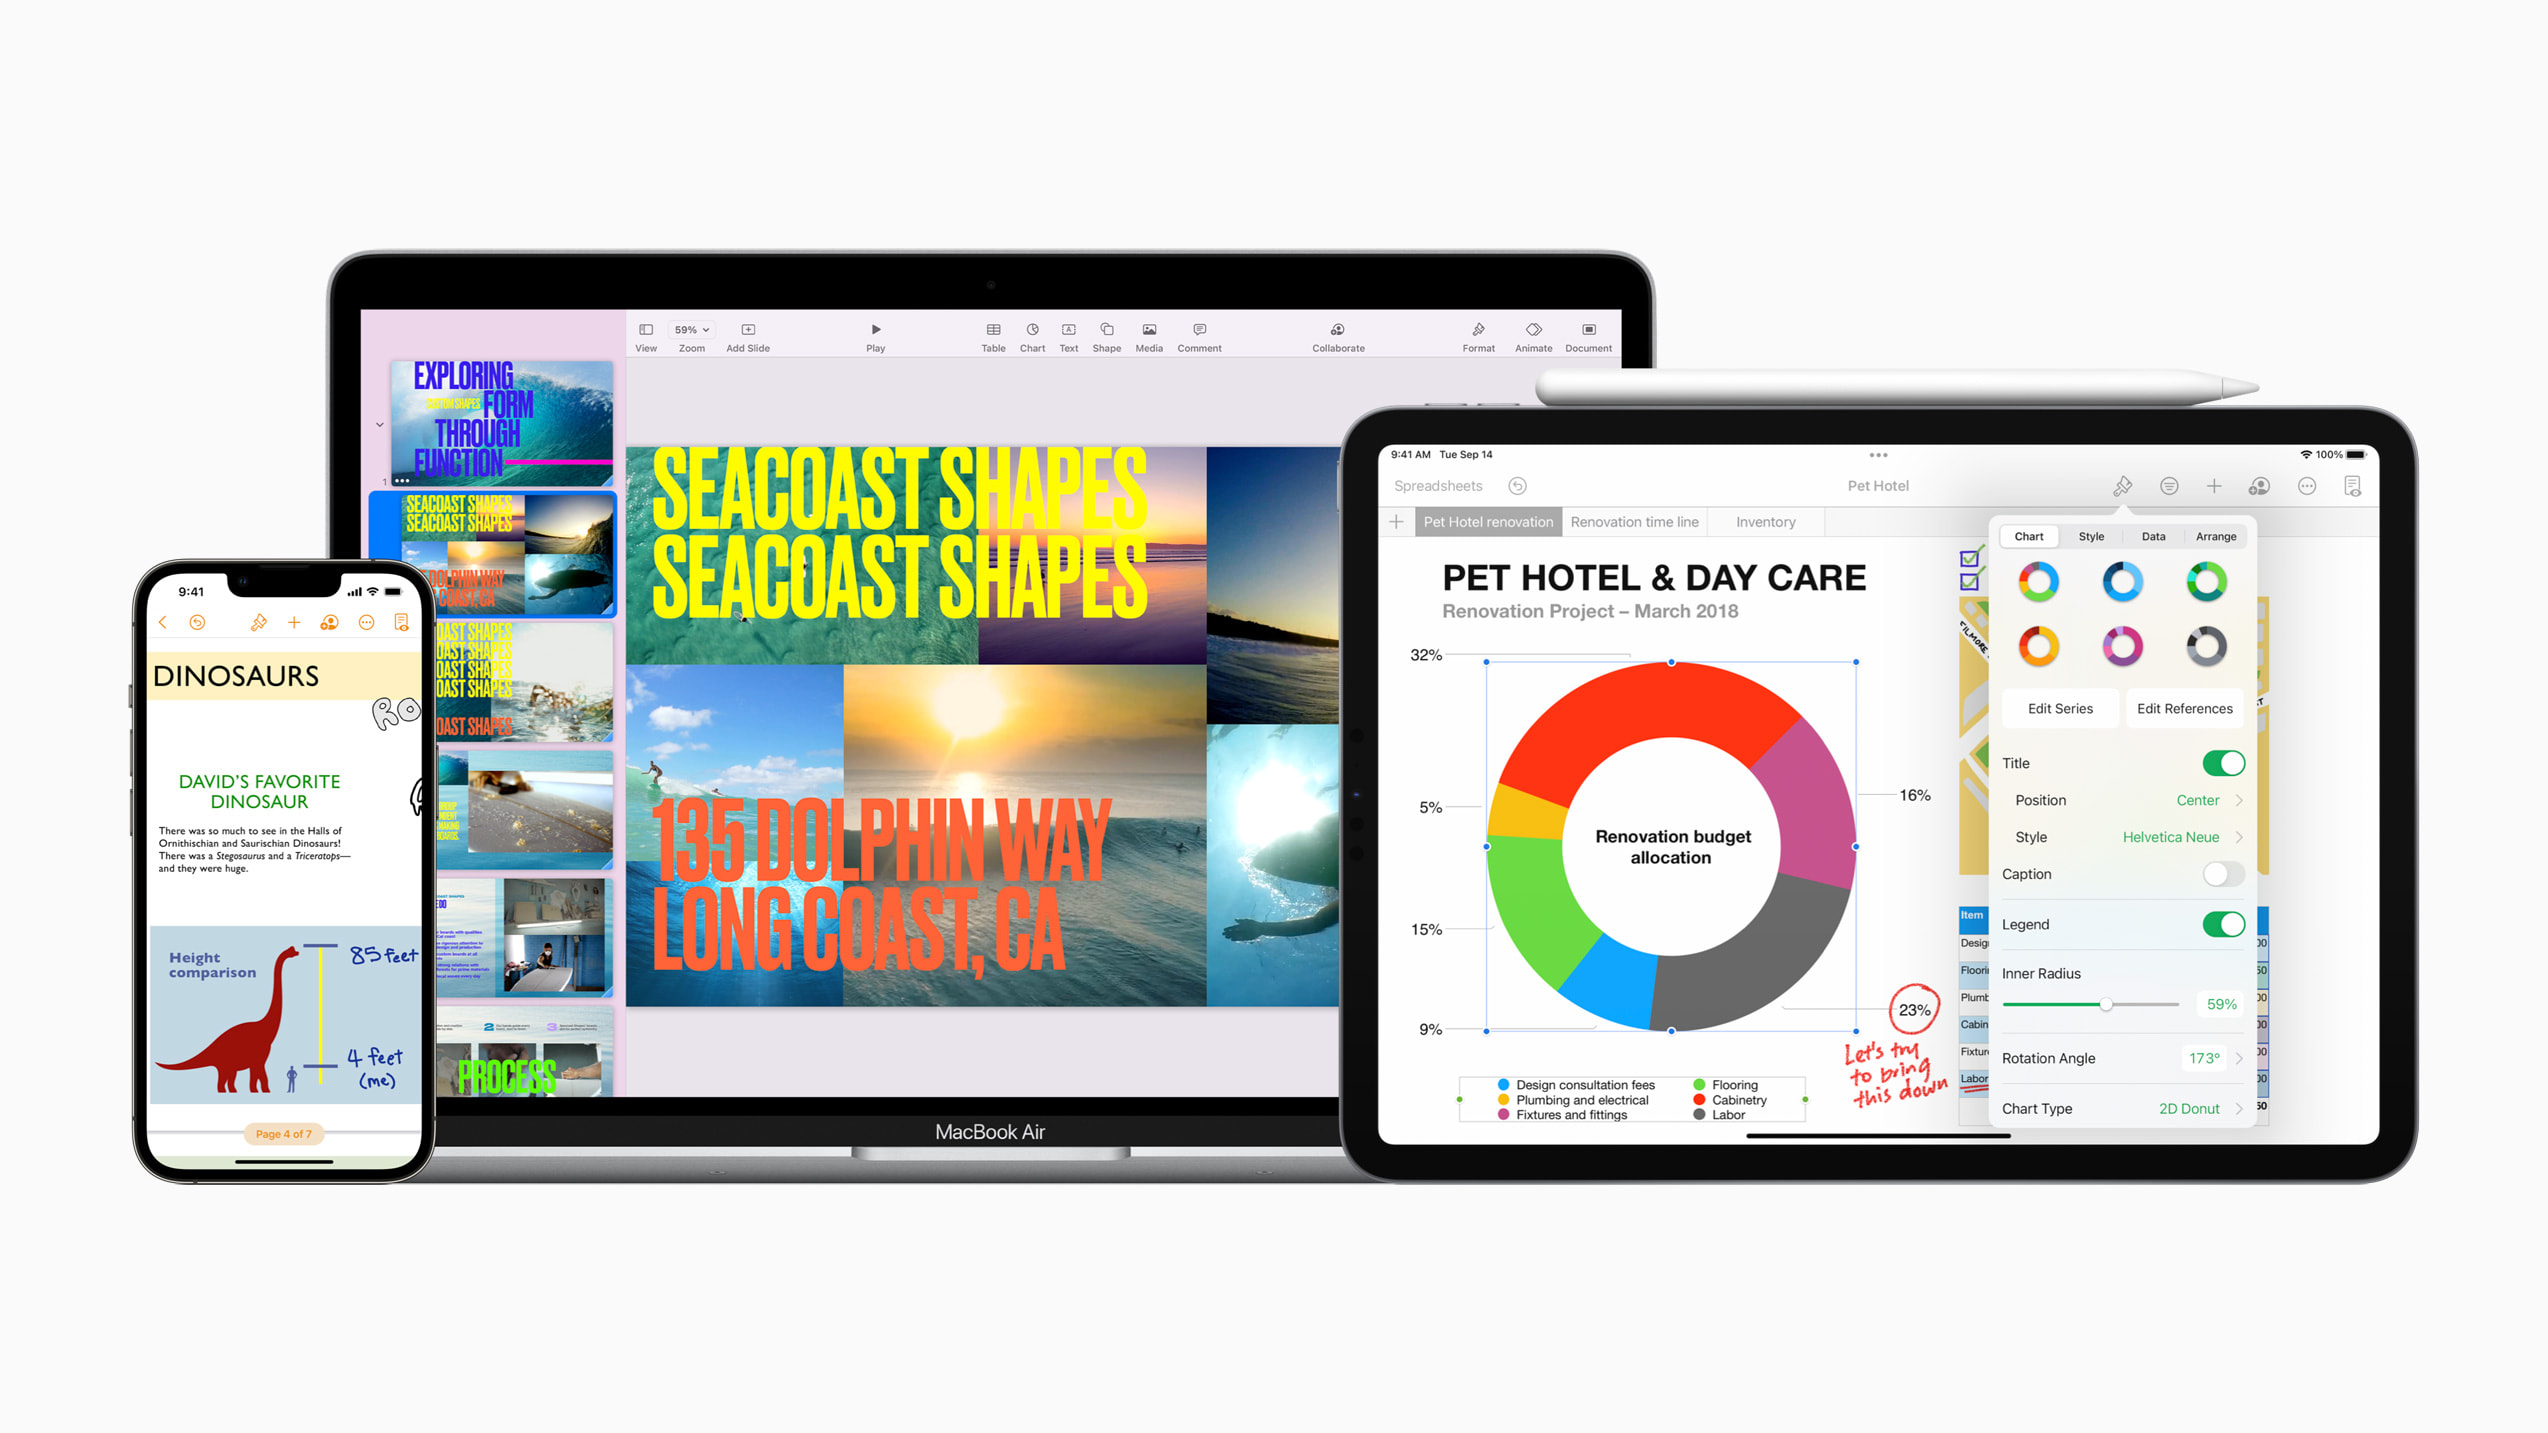 Microsoft Word vs Apple Pages: Is Pages Better Than Word For Macs?